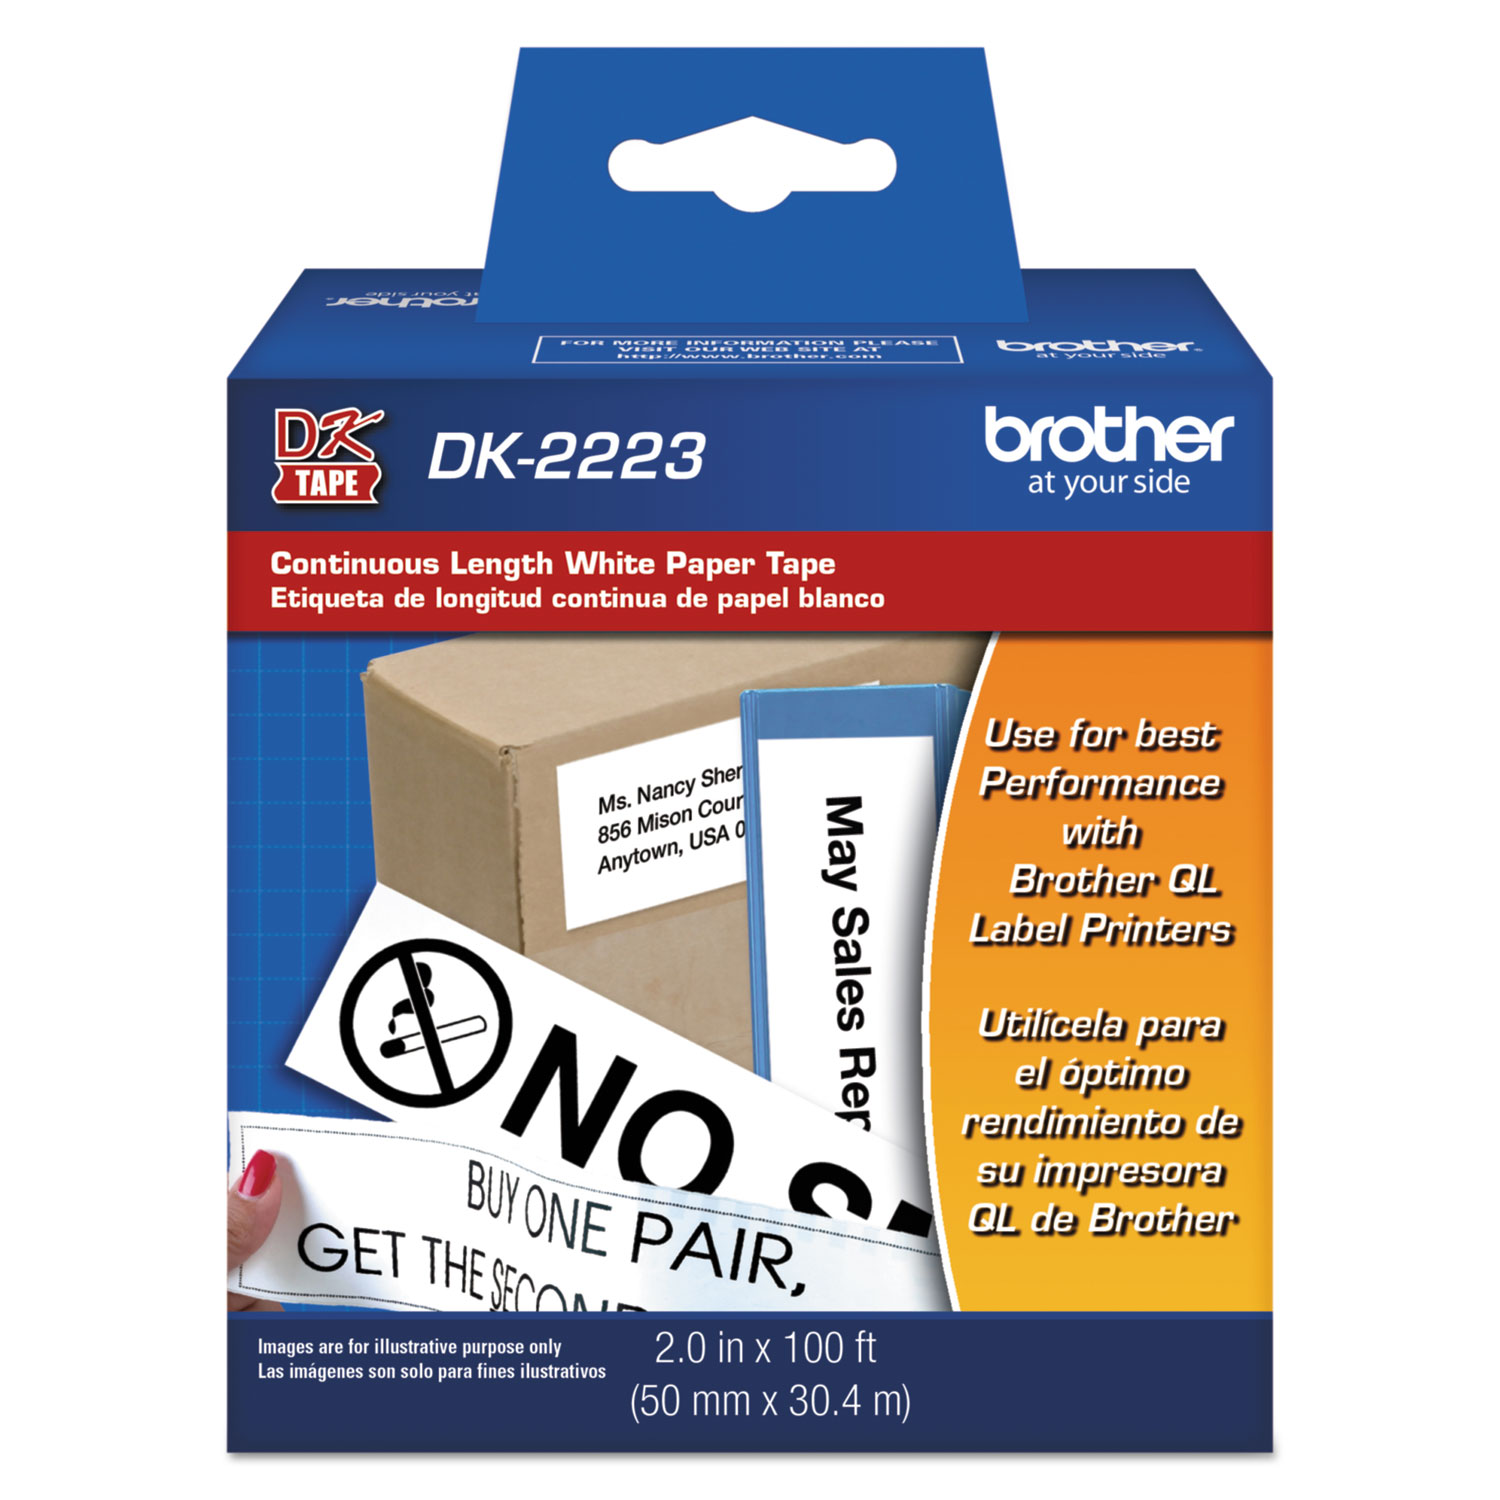  Brother DK2223 Continuous Paper Label Tape, 2 x 100 ft, Black/White (BRTDK2223) 